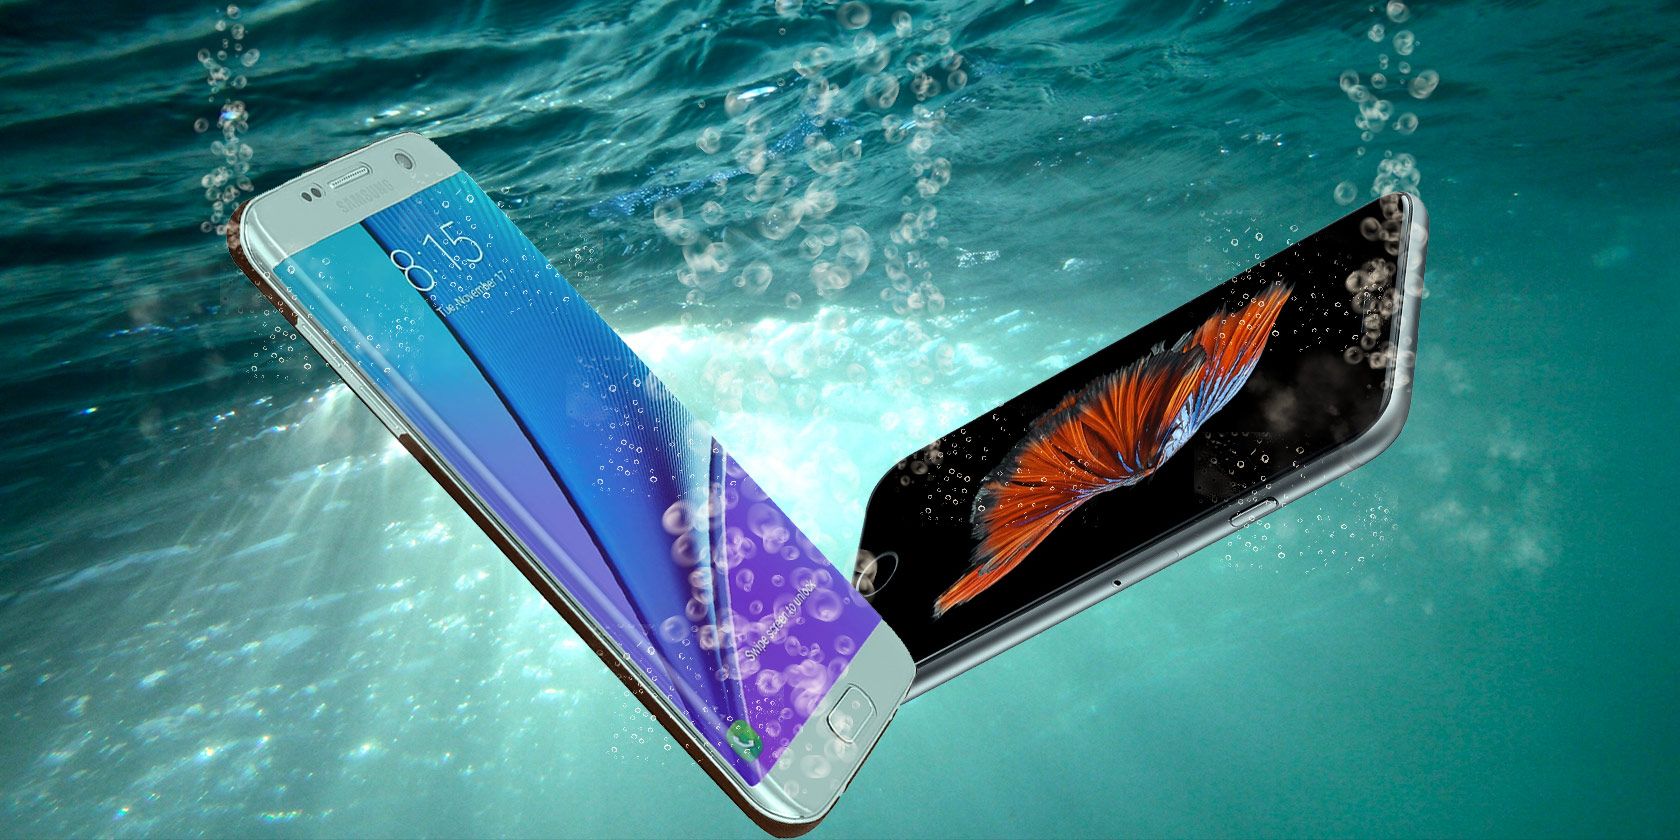 android phone to test water resistance